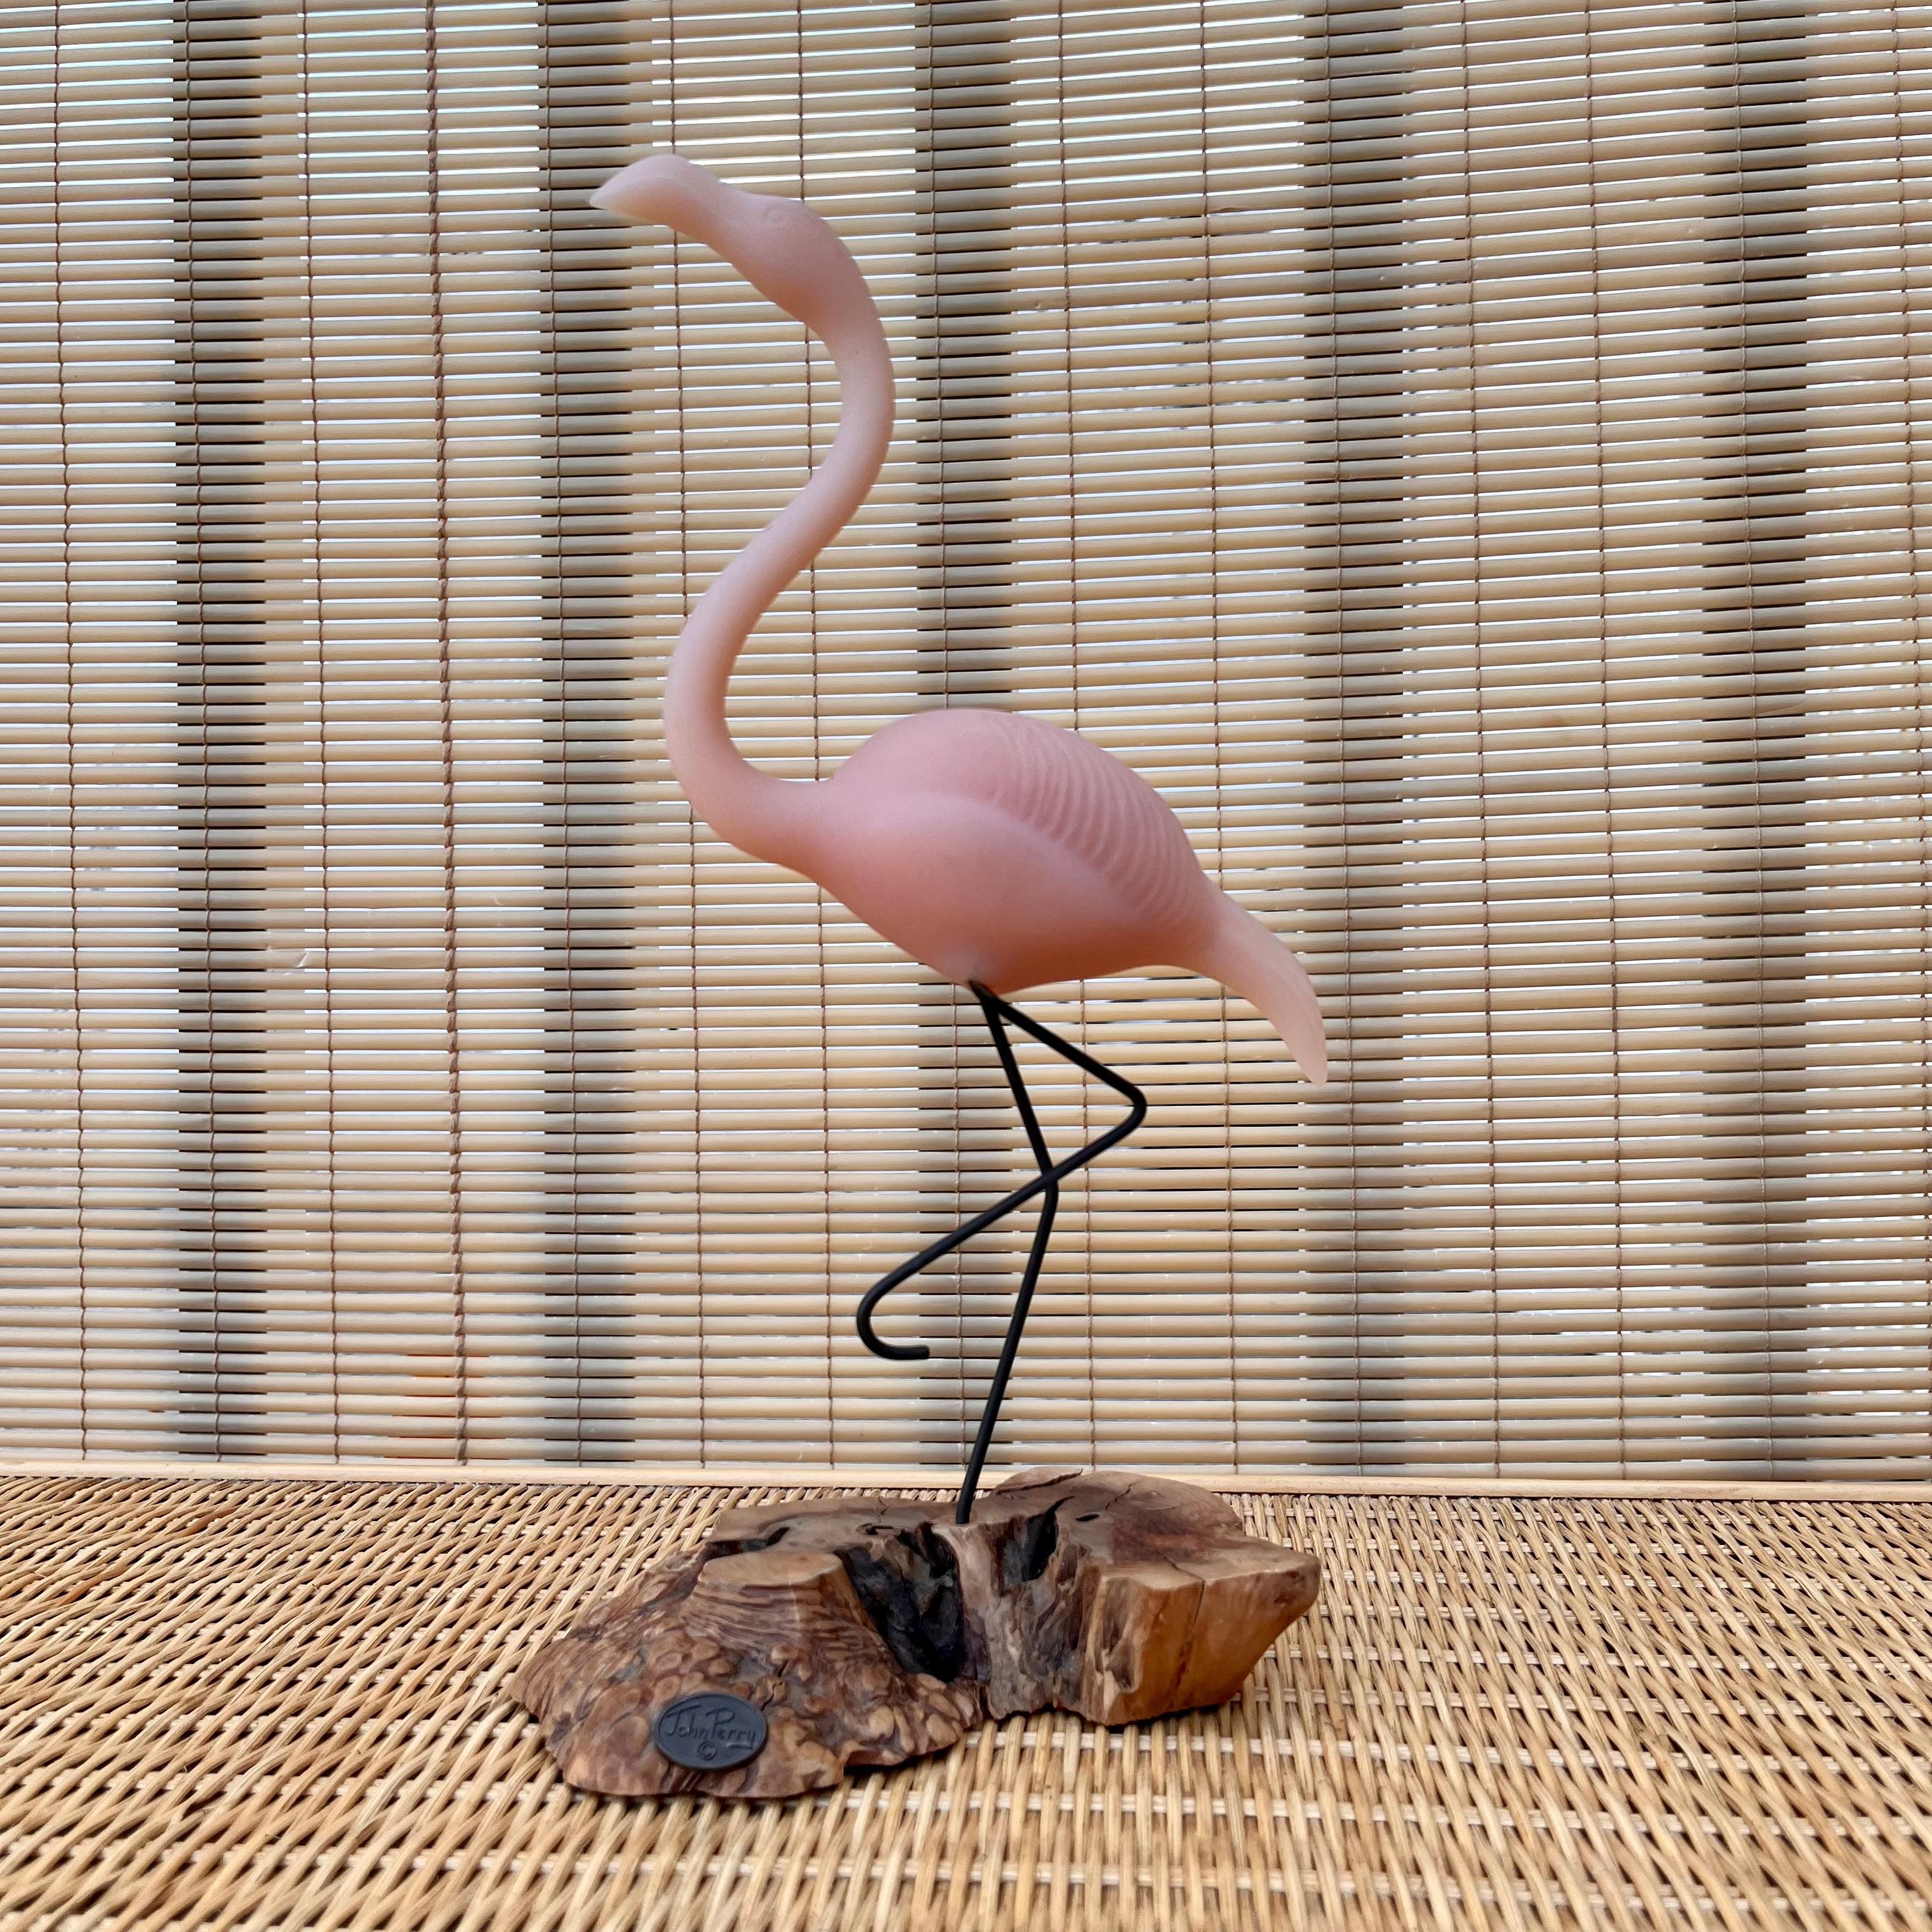 Vintage Original John Perry Pink Flamingo Sculpture With Burlwood Base. Circa 1980s
Features a pink flamingo molded in a compound of resins, pellucida, which is similar to but actually more durable than bisque porcelain. and Mounted on a polished